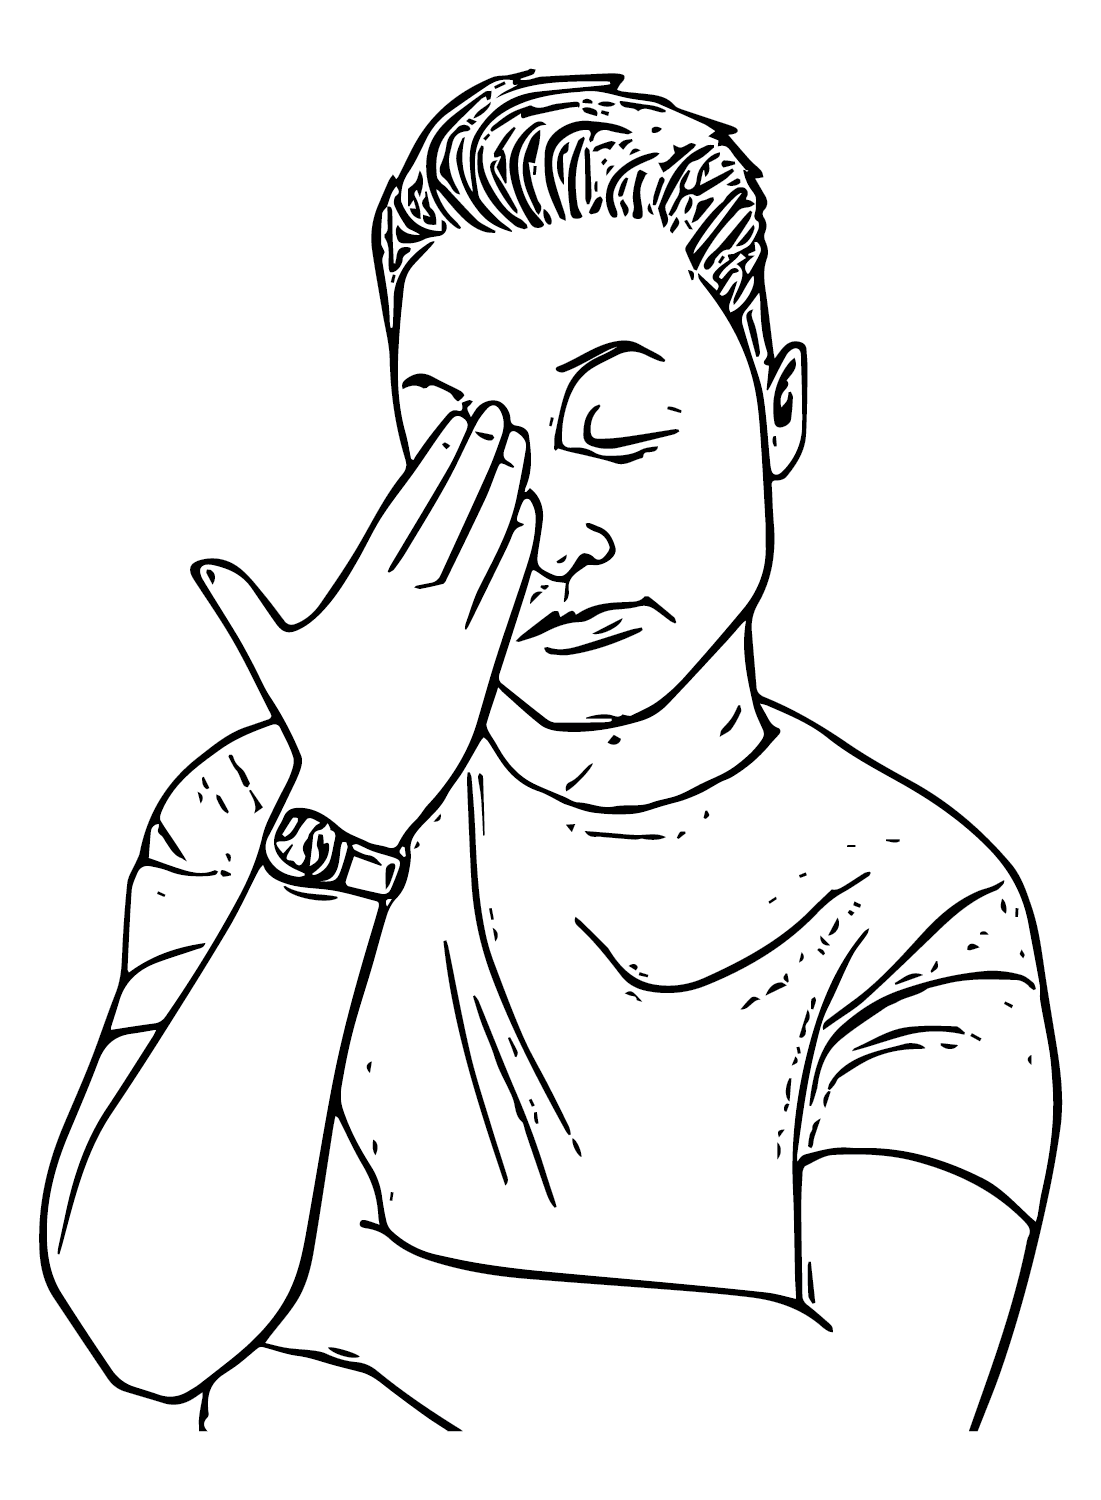 Elon Musk Free Coloring Pages